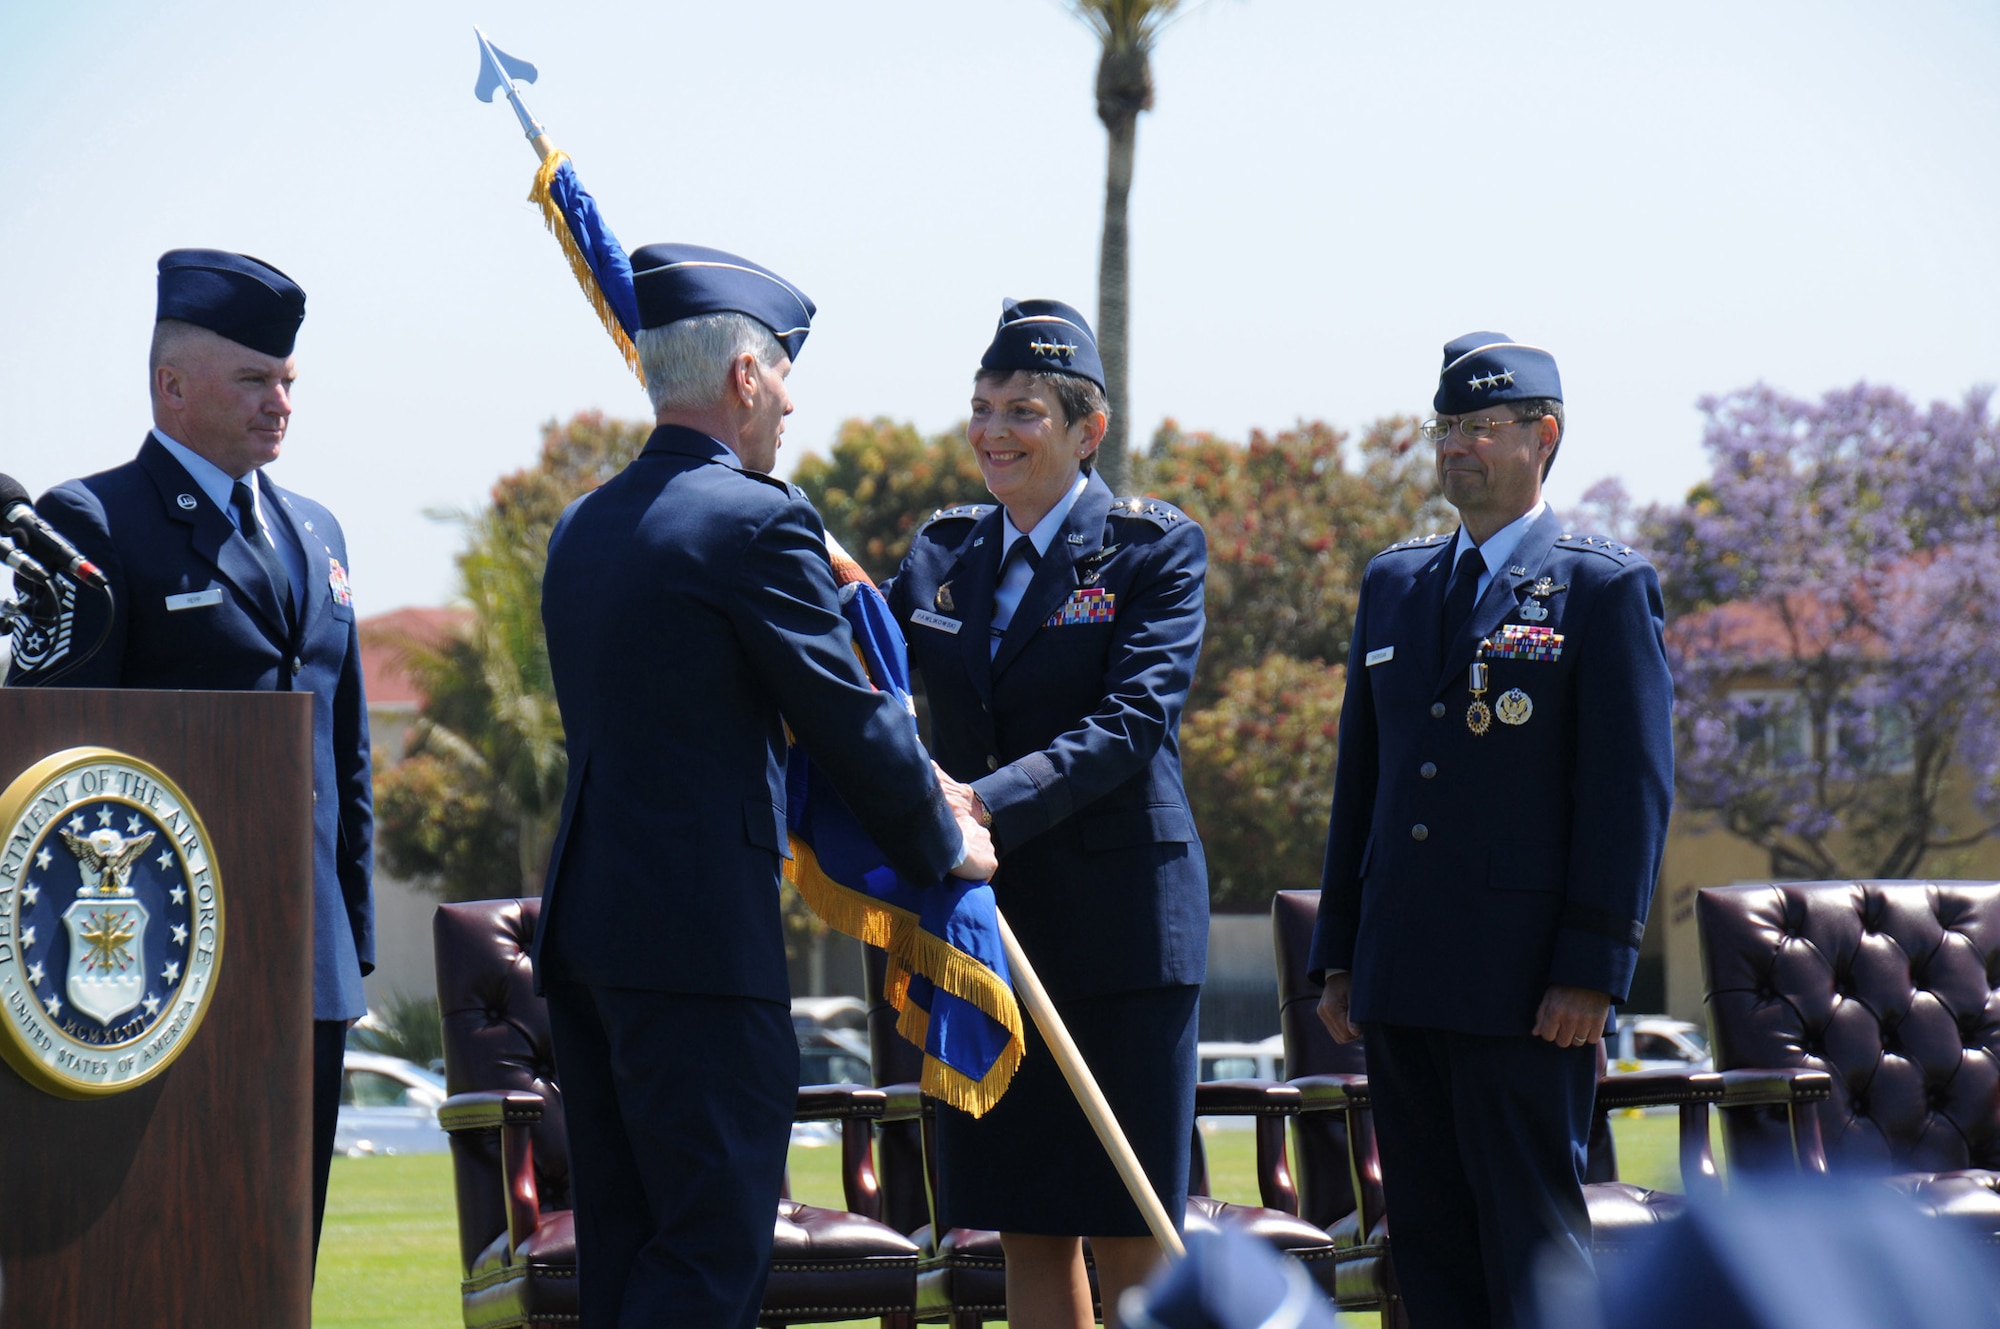 Lieutenant Gen. Ellen Pawlikowski, the first female Space and Missile System Center commander, accepts the command flag from Air Force Space Command commander, Gen. William Shelton, as SMC Command Chief Master Sgt. Mark Repp (far left) and outgoing SMC commander, Lt. Gen. Tom Sheridan (far right) look on.  General Shelton officiated the change of command ceremony held on Fort MacArthur's parade grounds, June 3. (Photo by Joe Juarez)